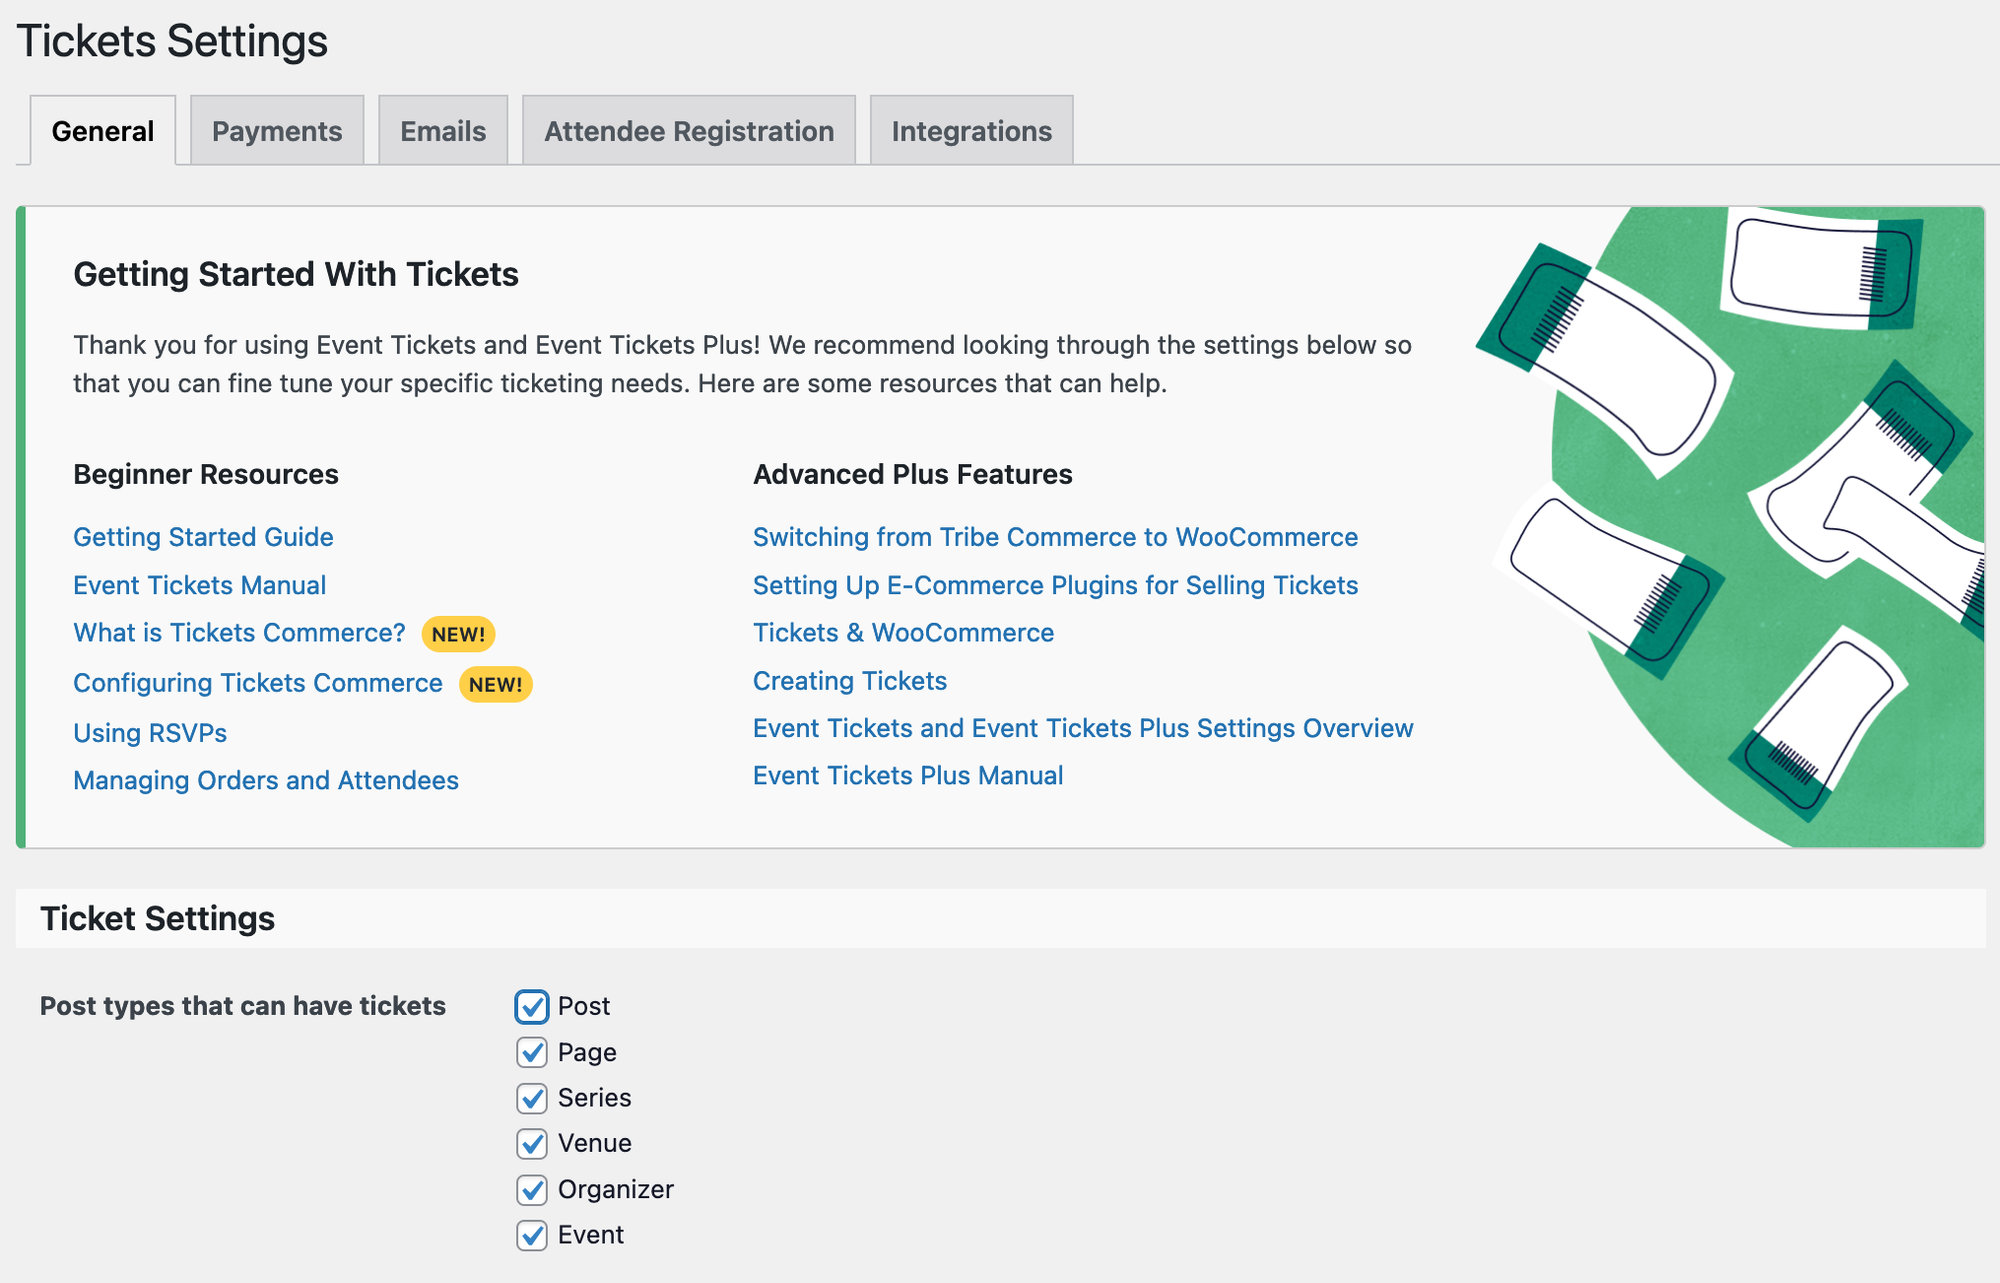 Tickets Settings UI showing what post types can have tickets